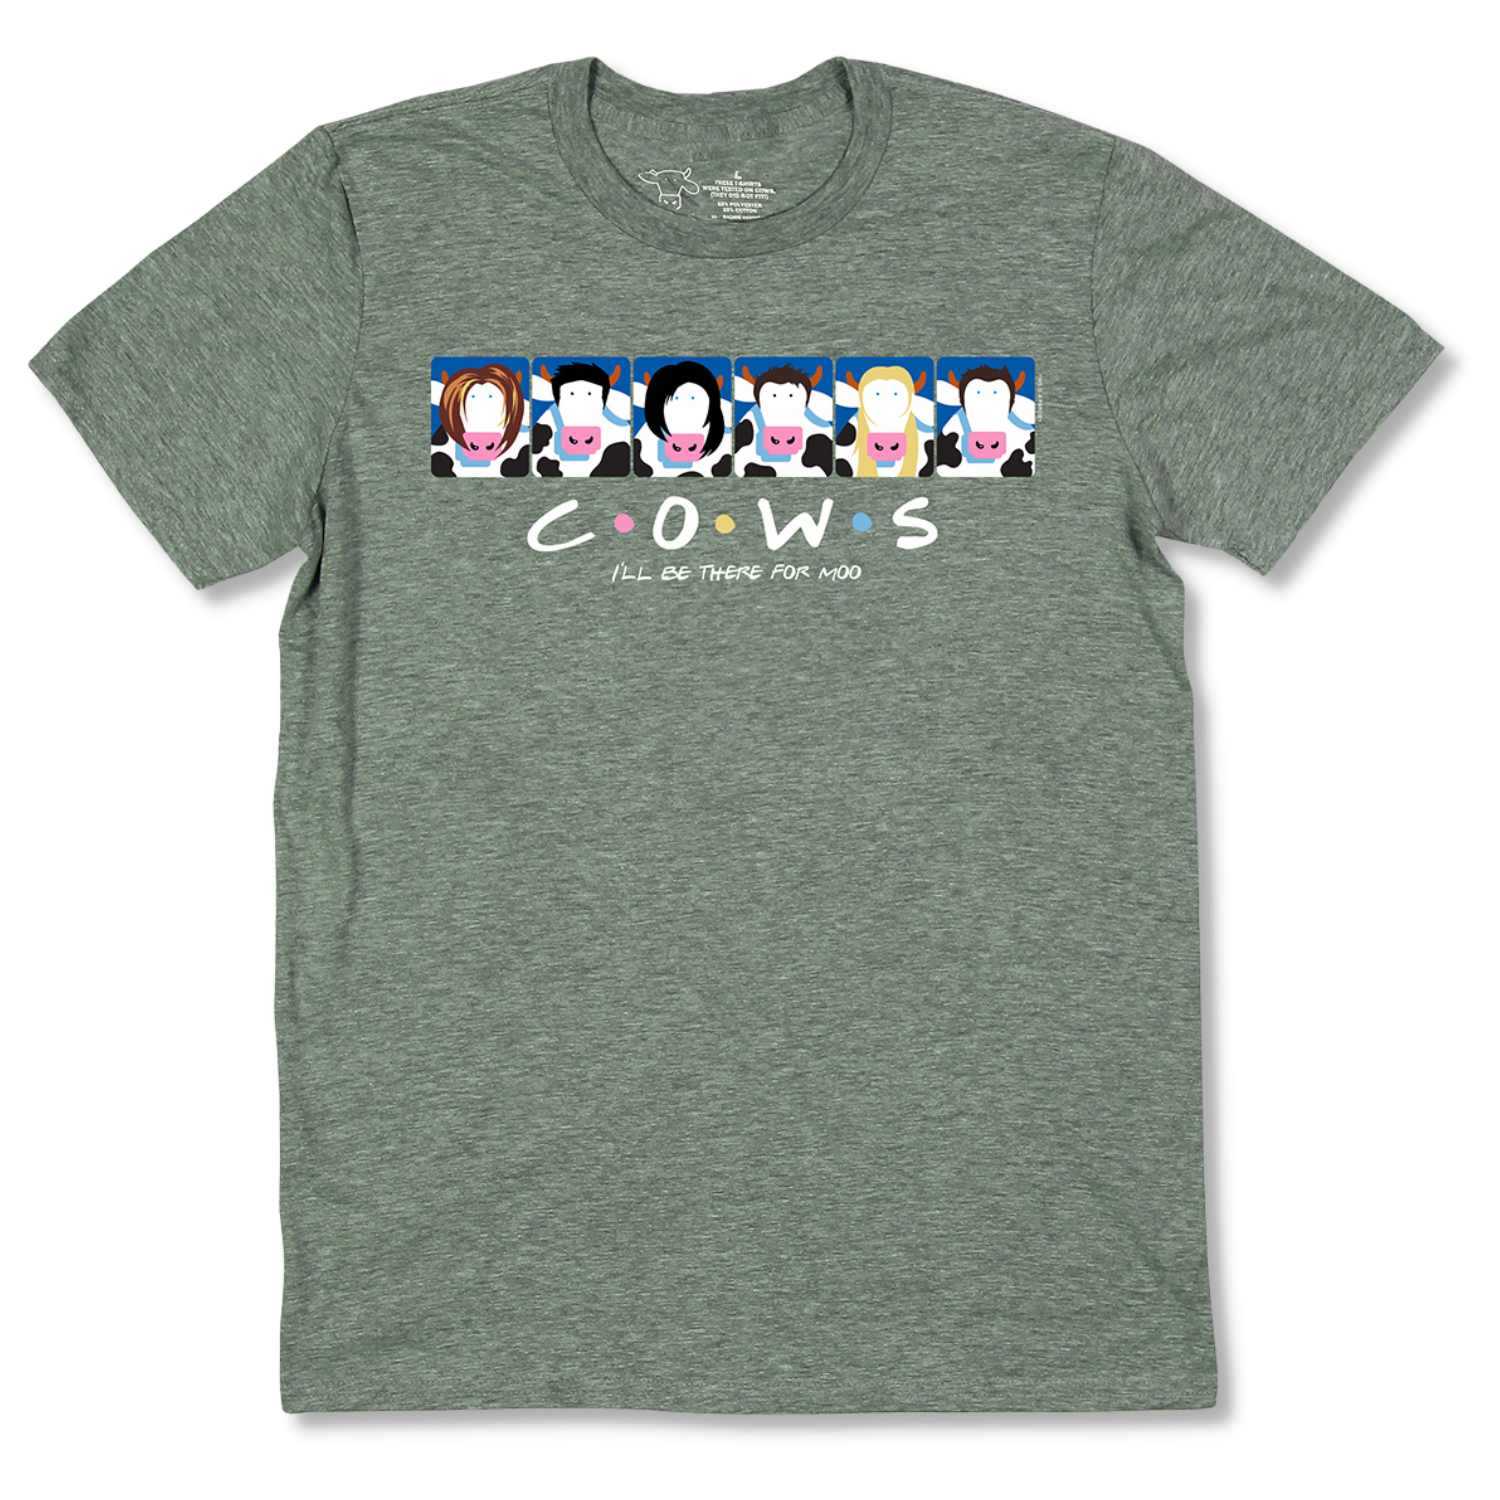 C-O-W-S Adult T